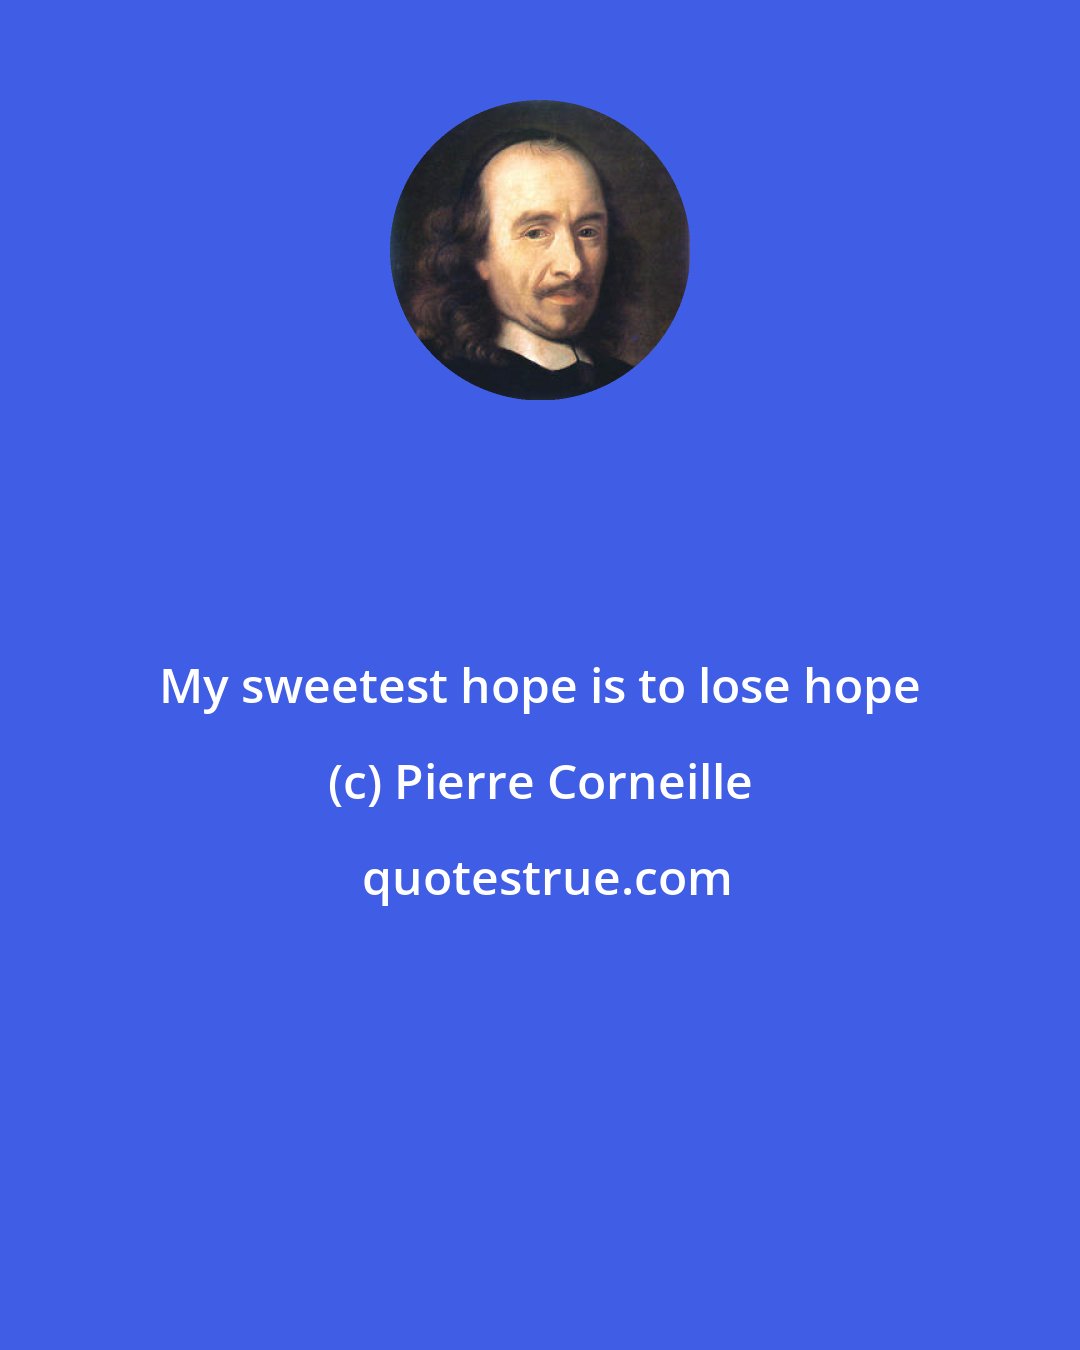 Pierre Corneille: My sweetest hope is to lose hope